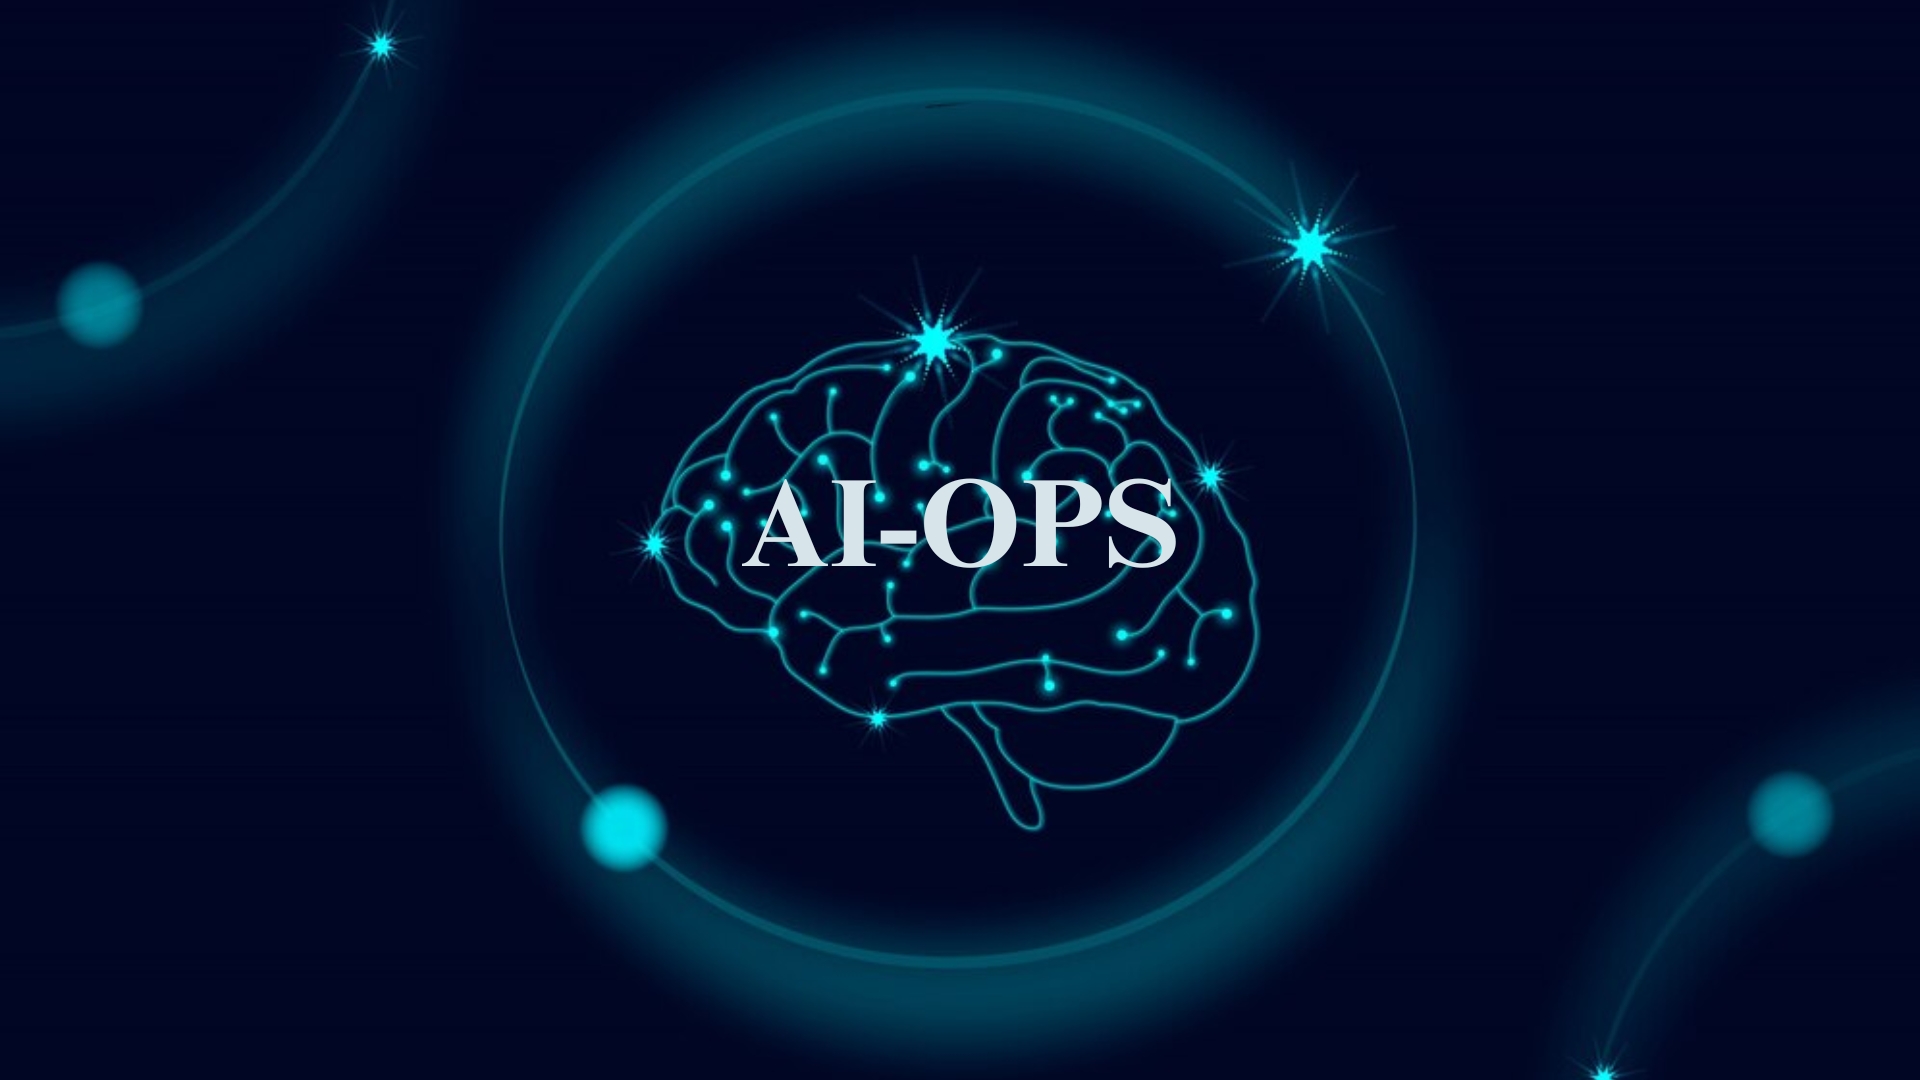 AIOps